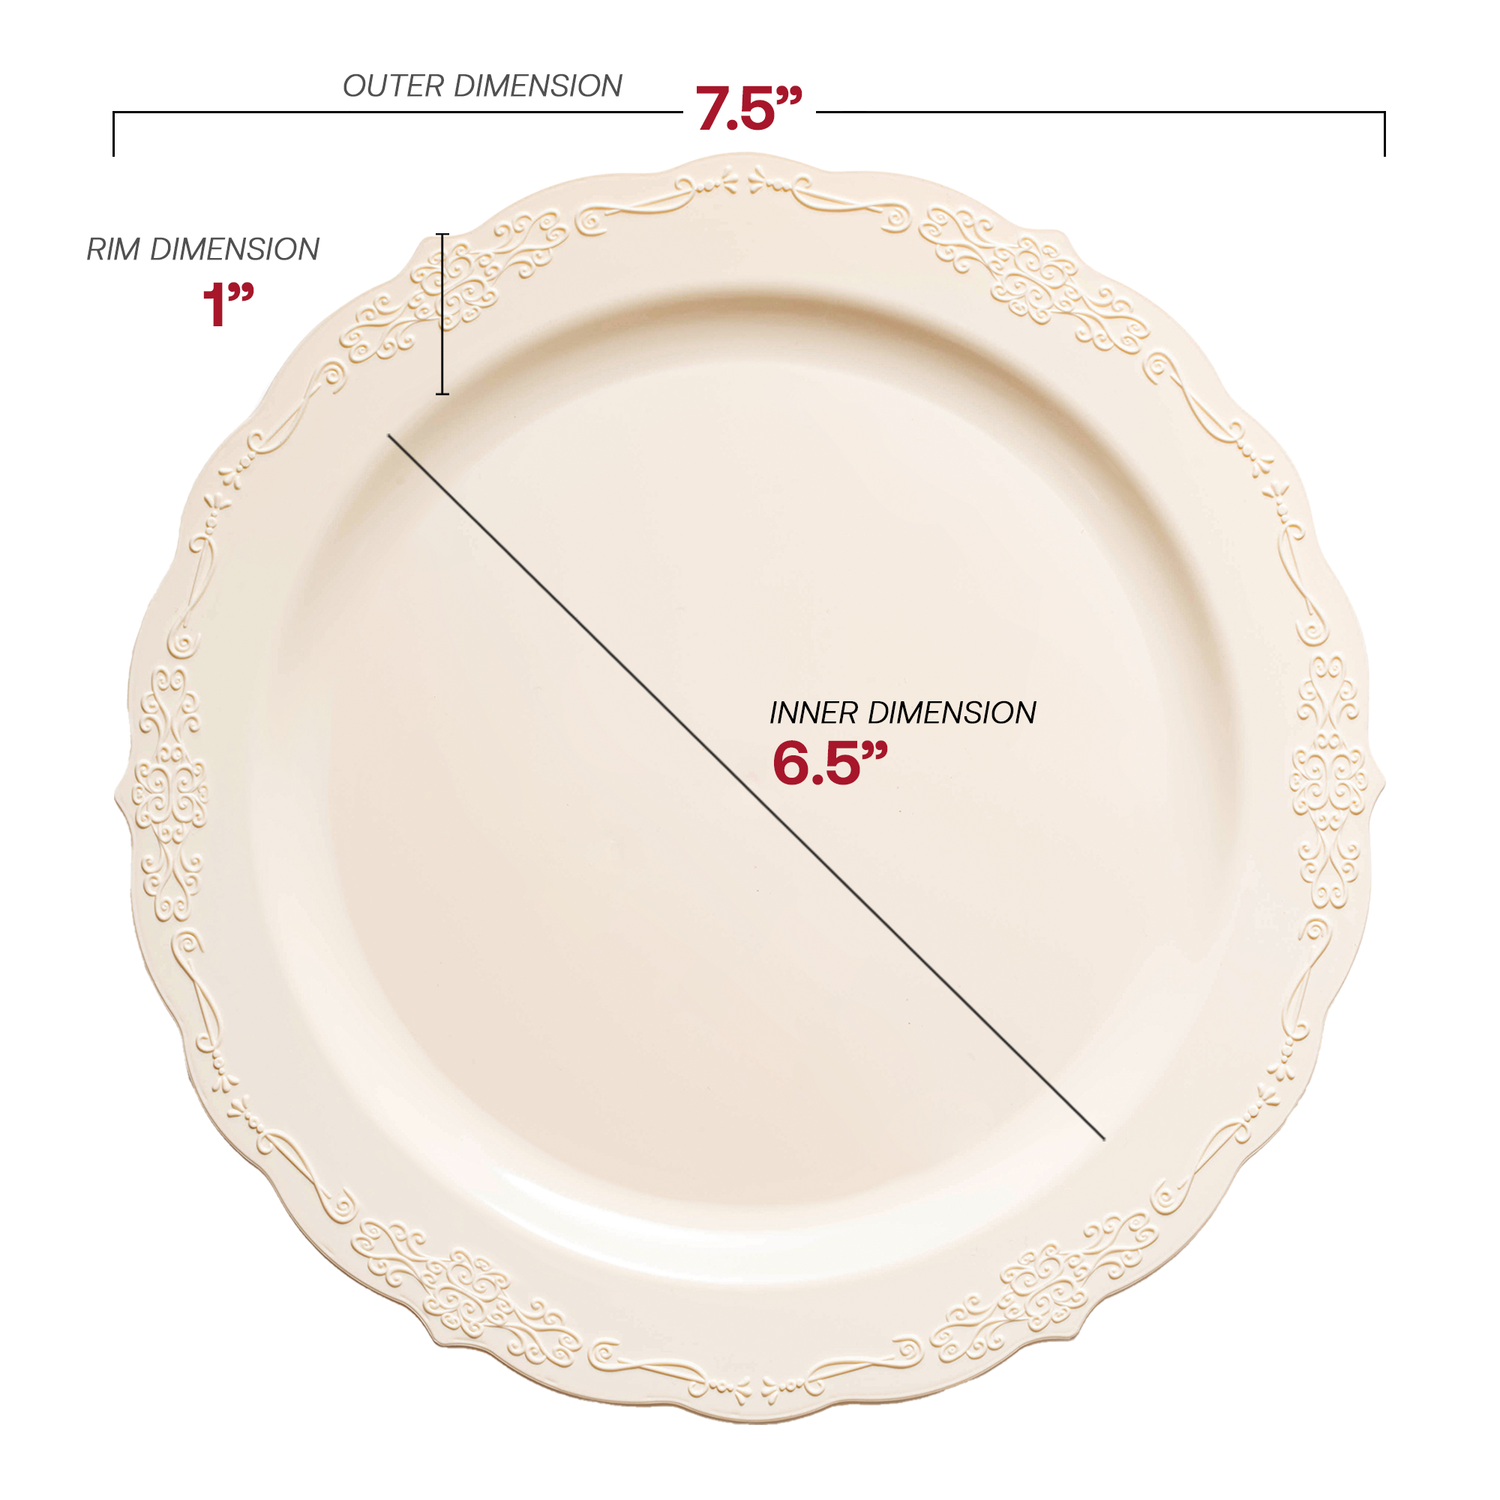 Ivory Vintage Round Disposable Plastic Appetizer/Salad Plates (7.5") Dimension | The Kaya Collection